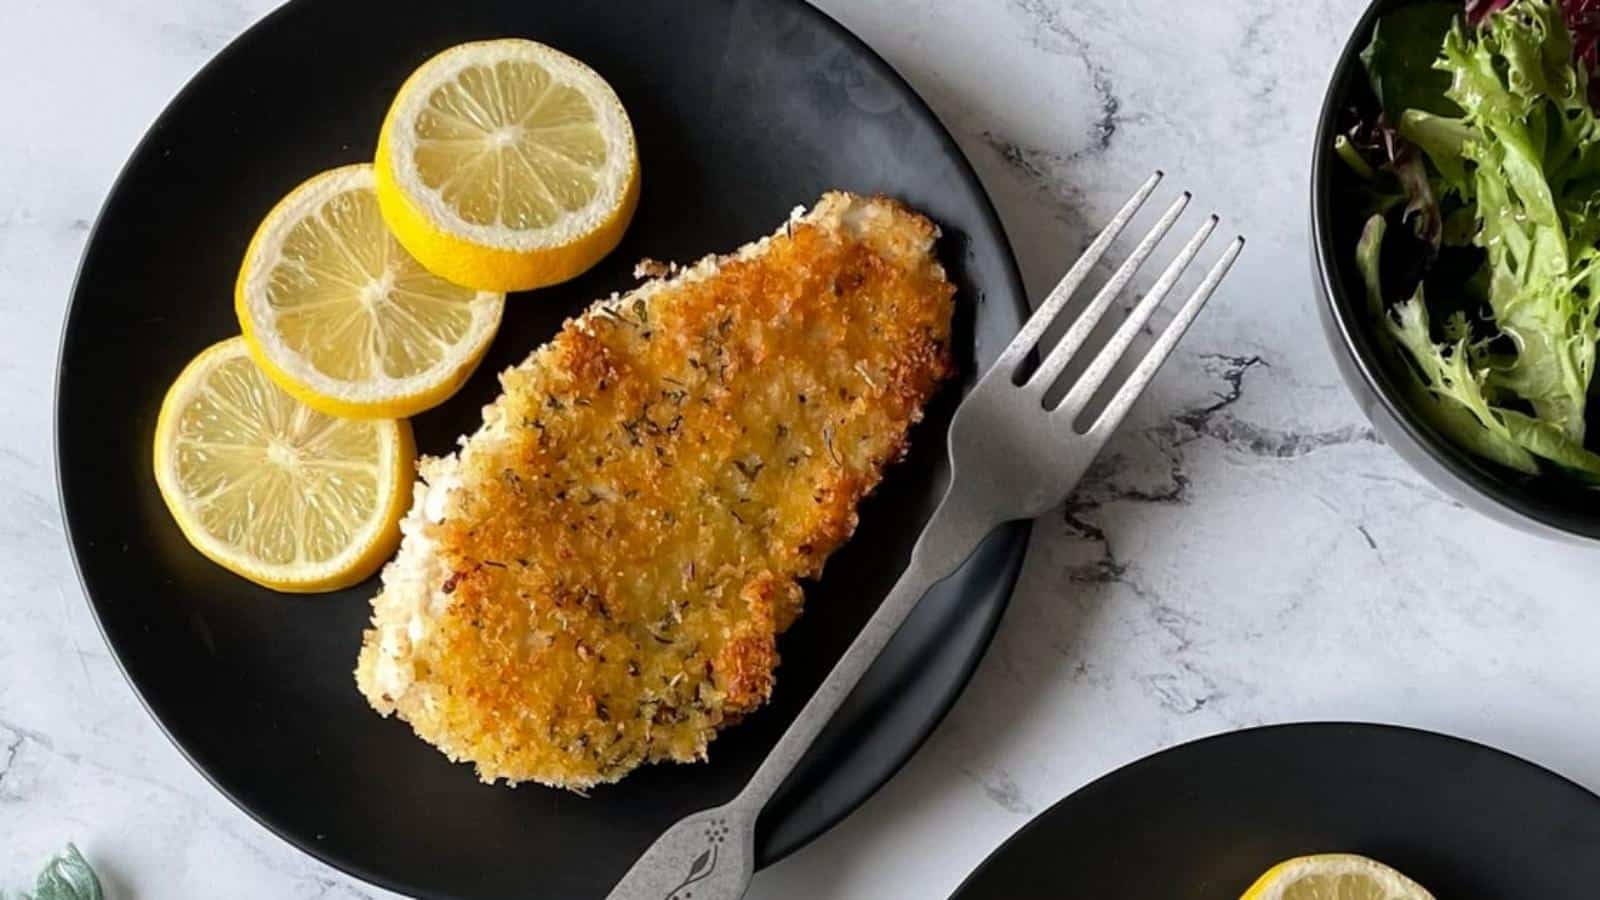 Italian chicken cutlets on a black plate with slices of lemon.